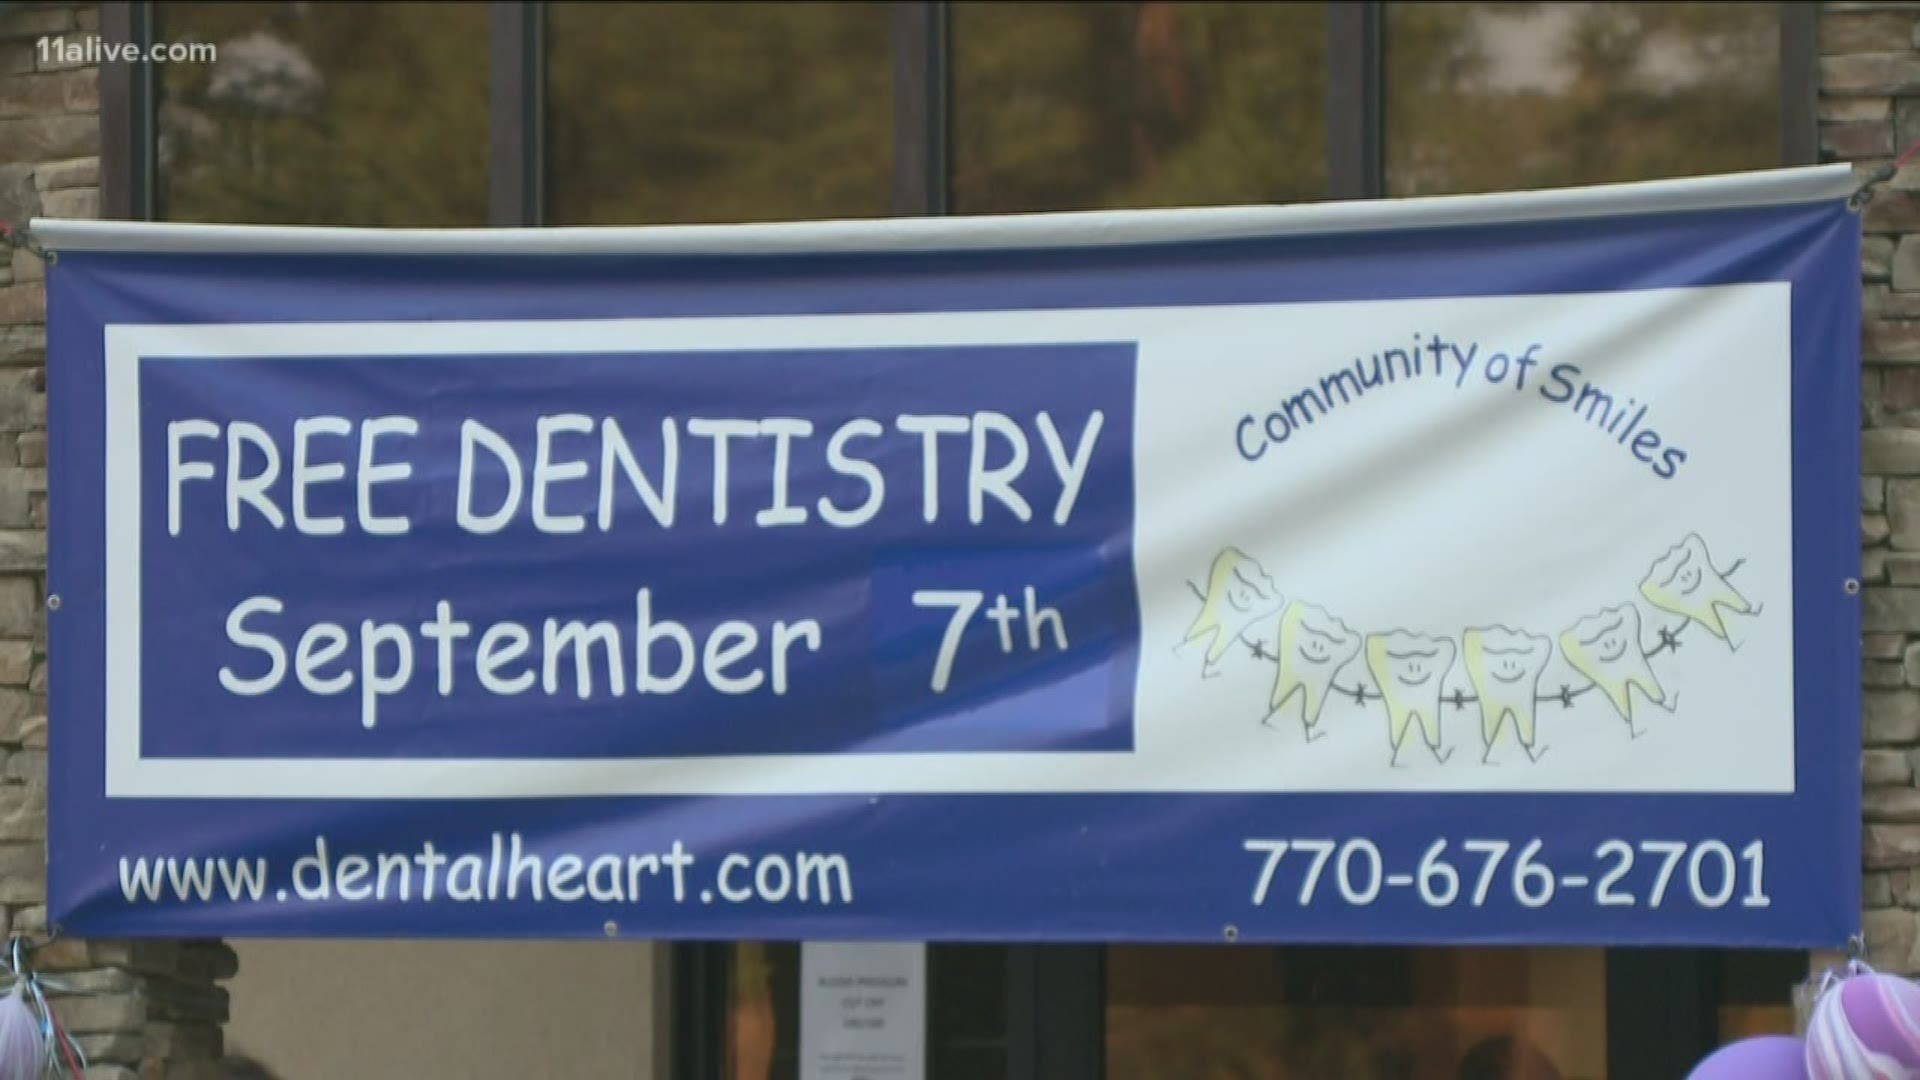 The 13th annual Free Dentistry Day is taking place on Saturday by Lawrenceville's Center for Cosmetic and Sedation Dentistry. According to the center's owner, Dr. Nooredin Nurani, says it is something they do to give back to the community each year.